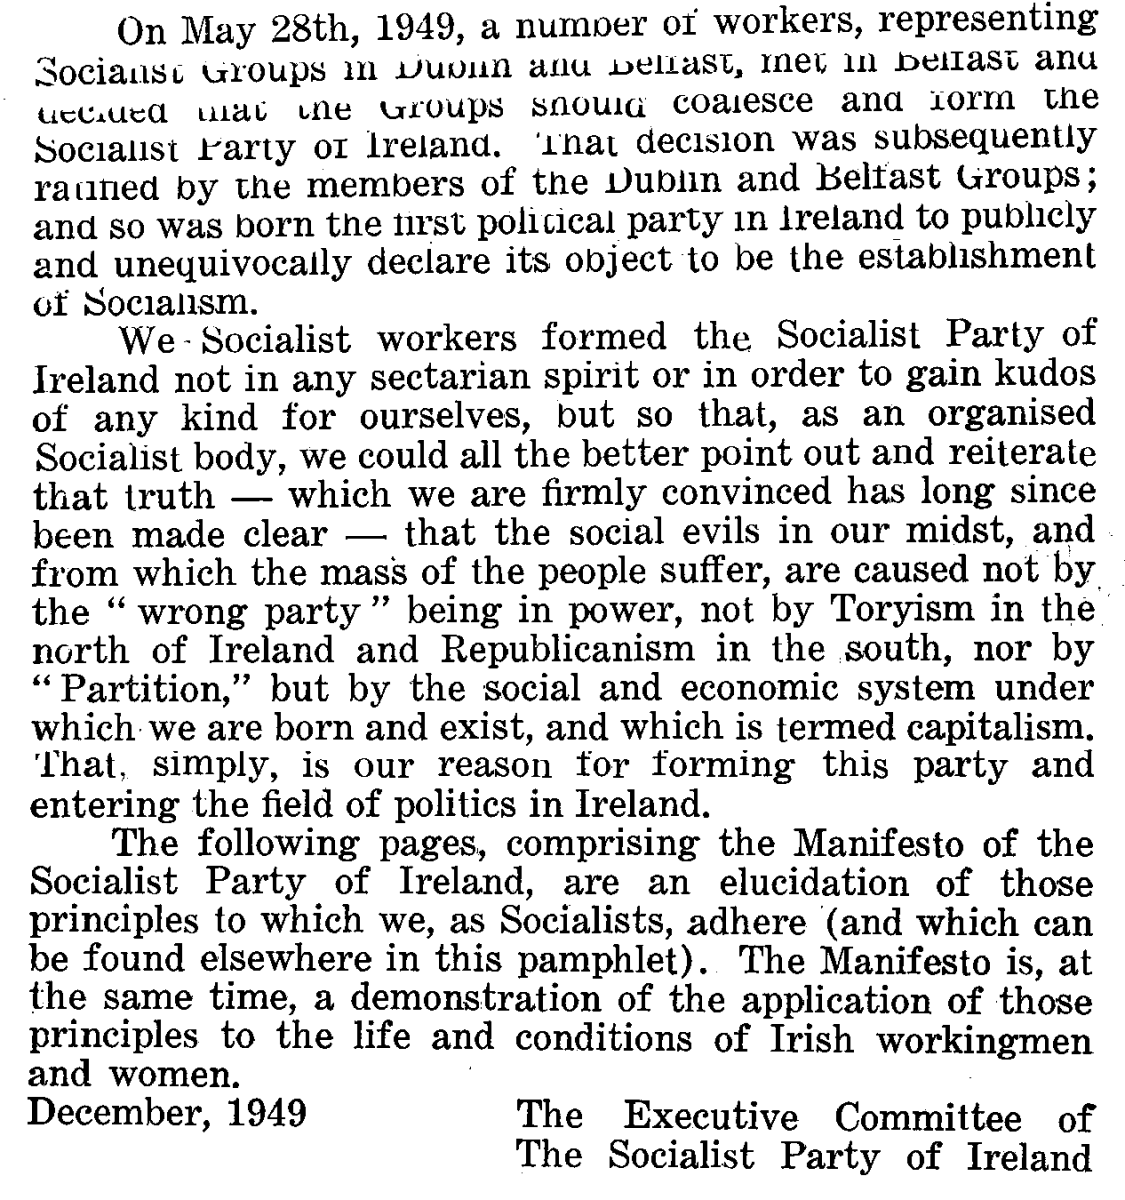 Preface to the Socialist Party of Ireland Manifesto (1949)